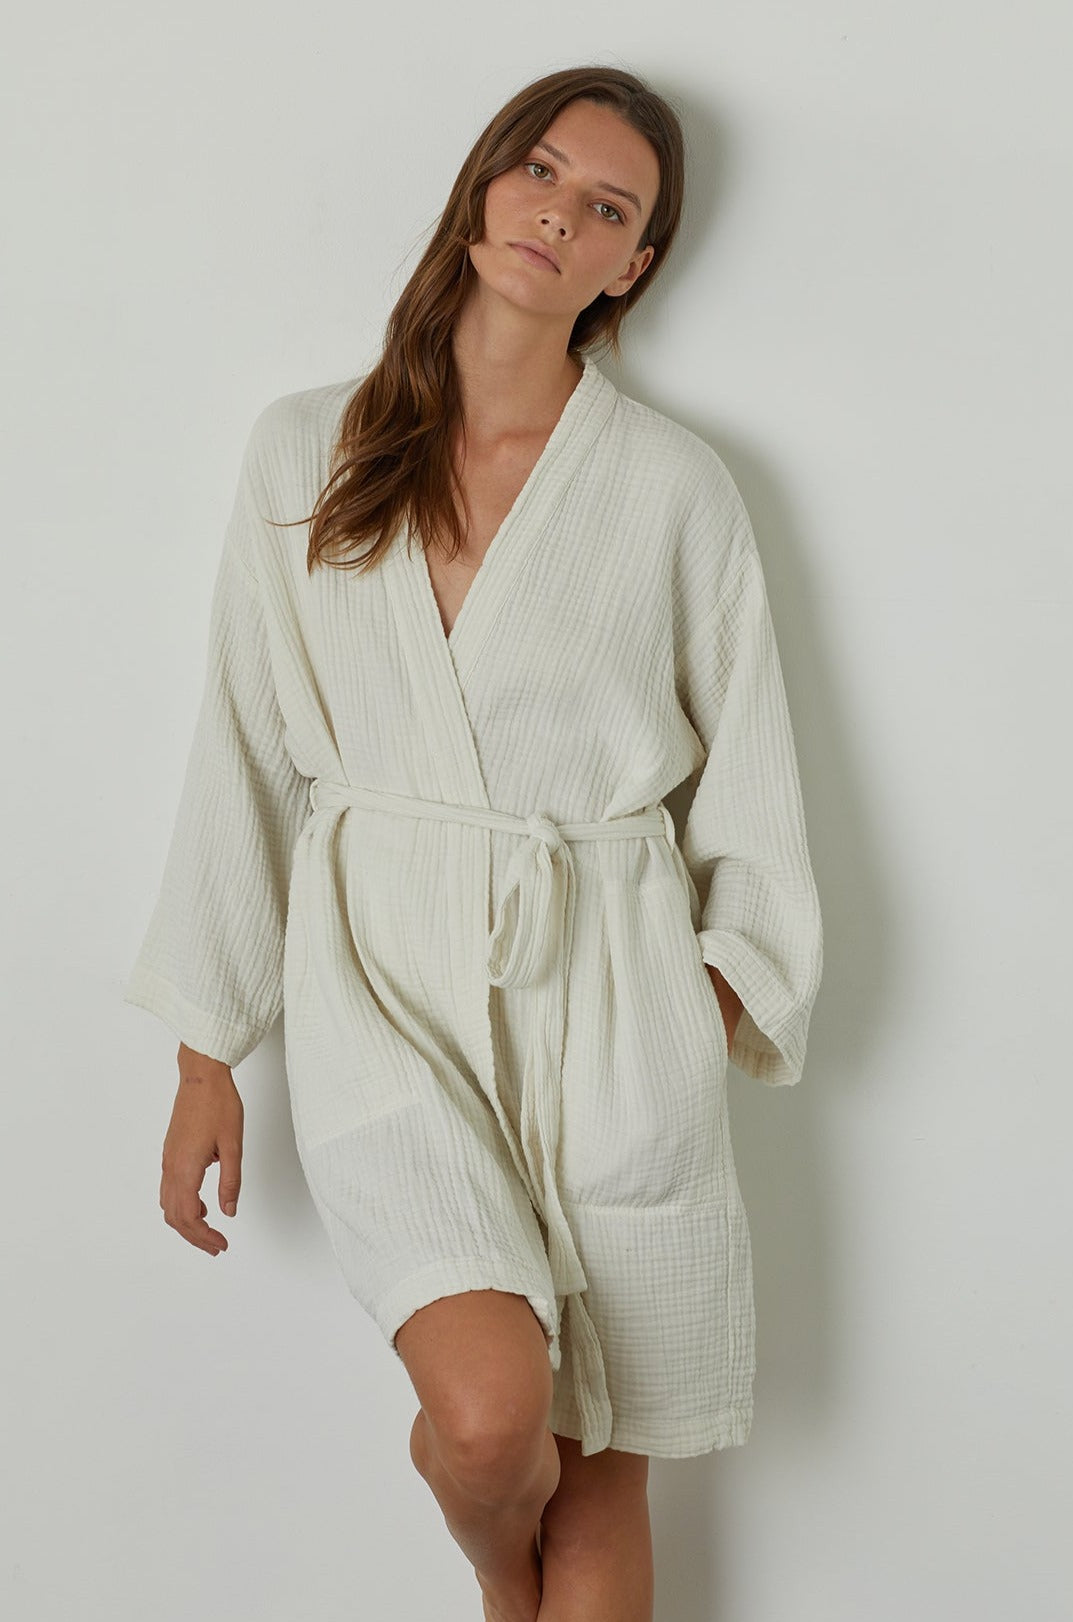 A woman wearing a MINI COTTON GAUZE ROBE by Jenny Graham Home standing against a wall.-23555997565121